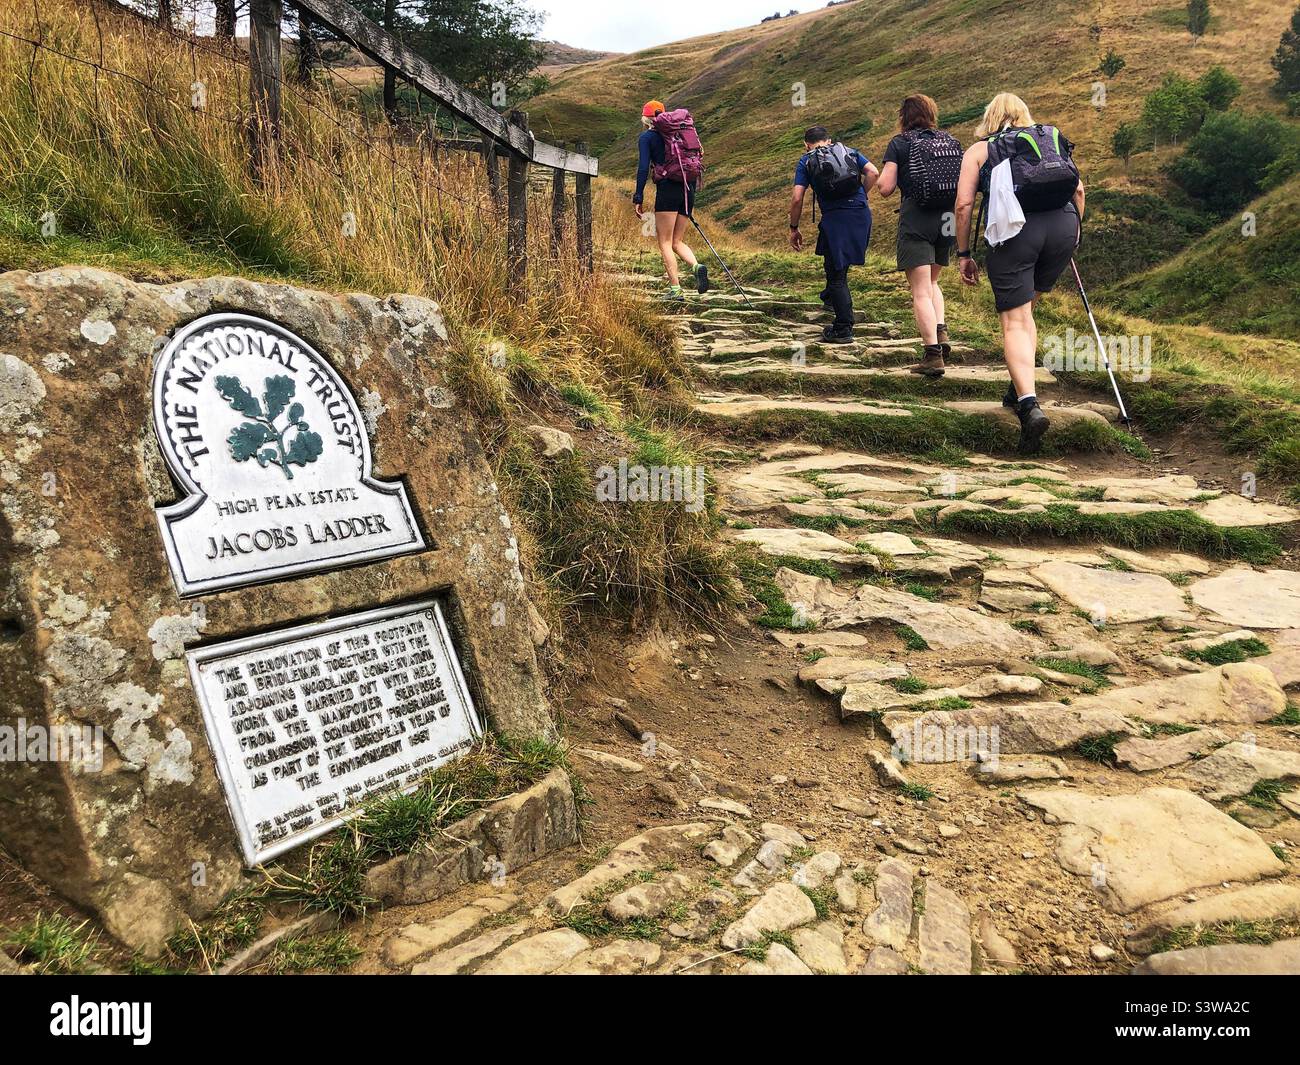 Walkers start the ascent of Jacobs ladder on the way to Kinder Scout ridge, Peak District National Park, England Stock Photo